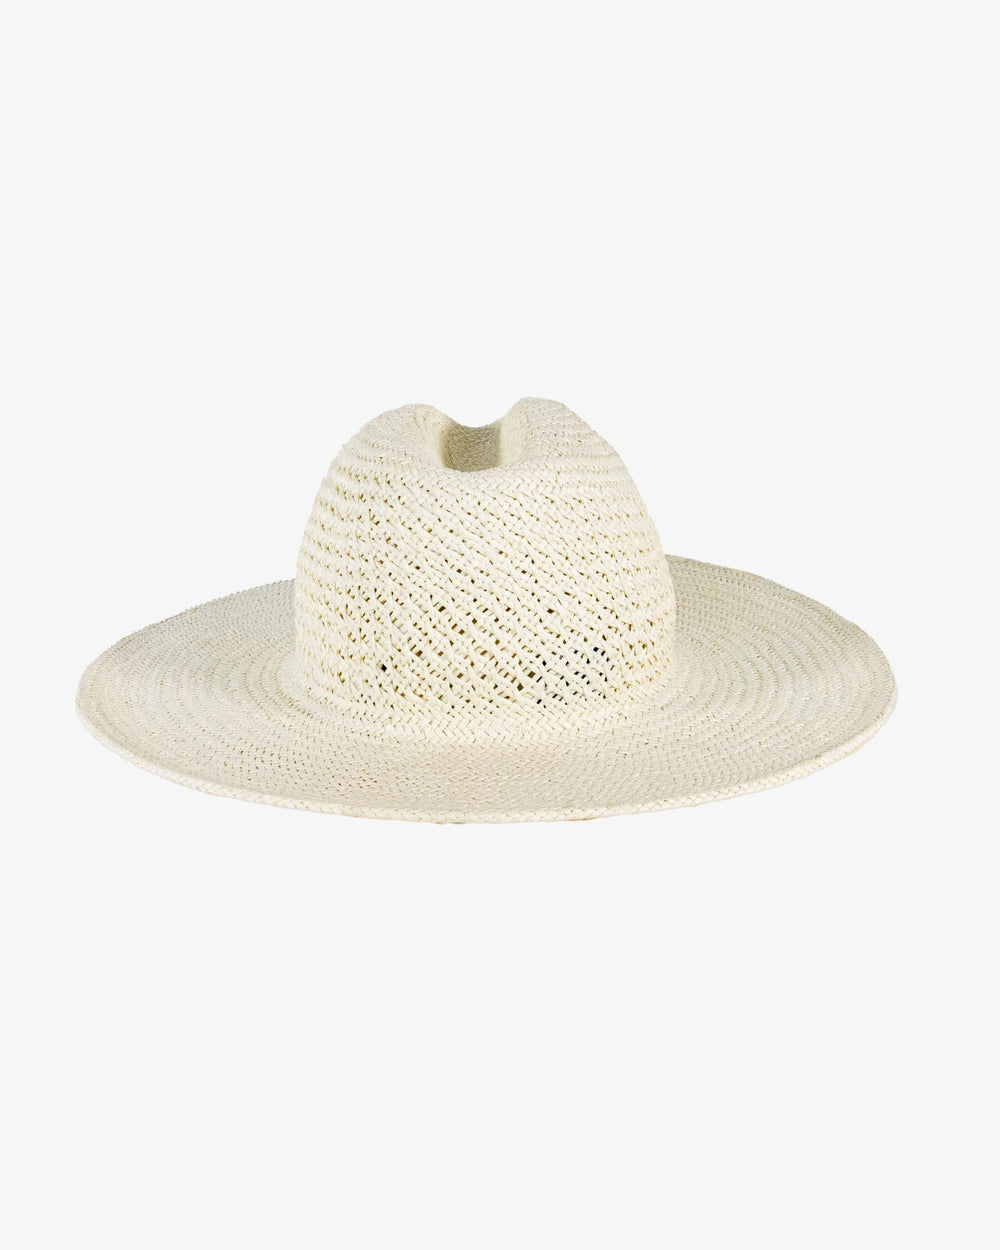 The back view of the Southern Tide Packable Straw Beach Hat by Southern Tide - White